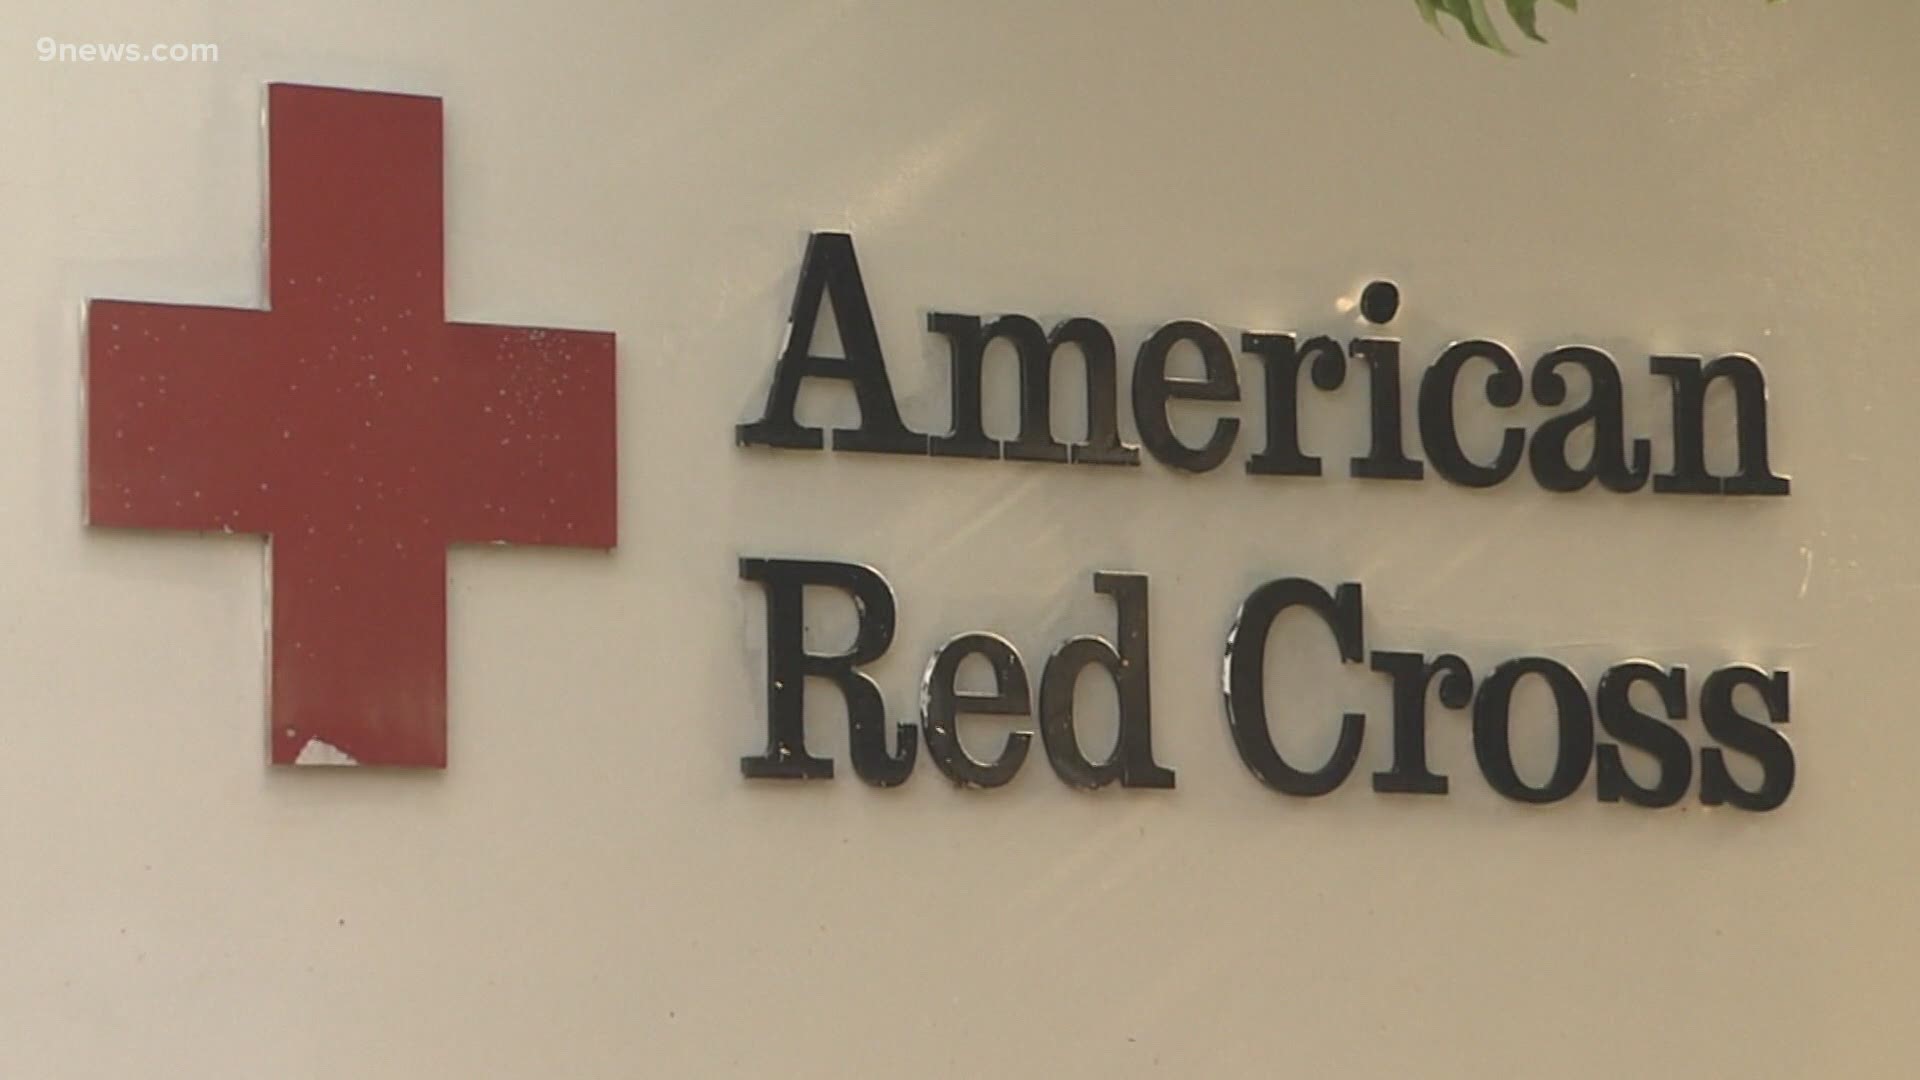 2 Grizzly Creek Fire evacuation centers set up by Red Cross | 9news.com